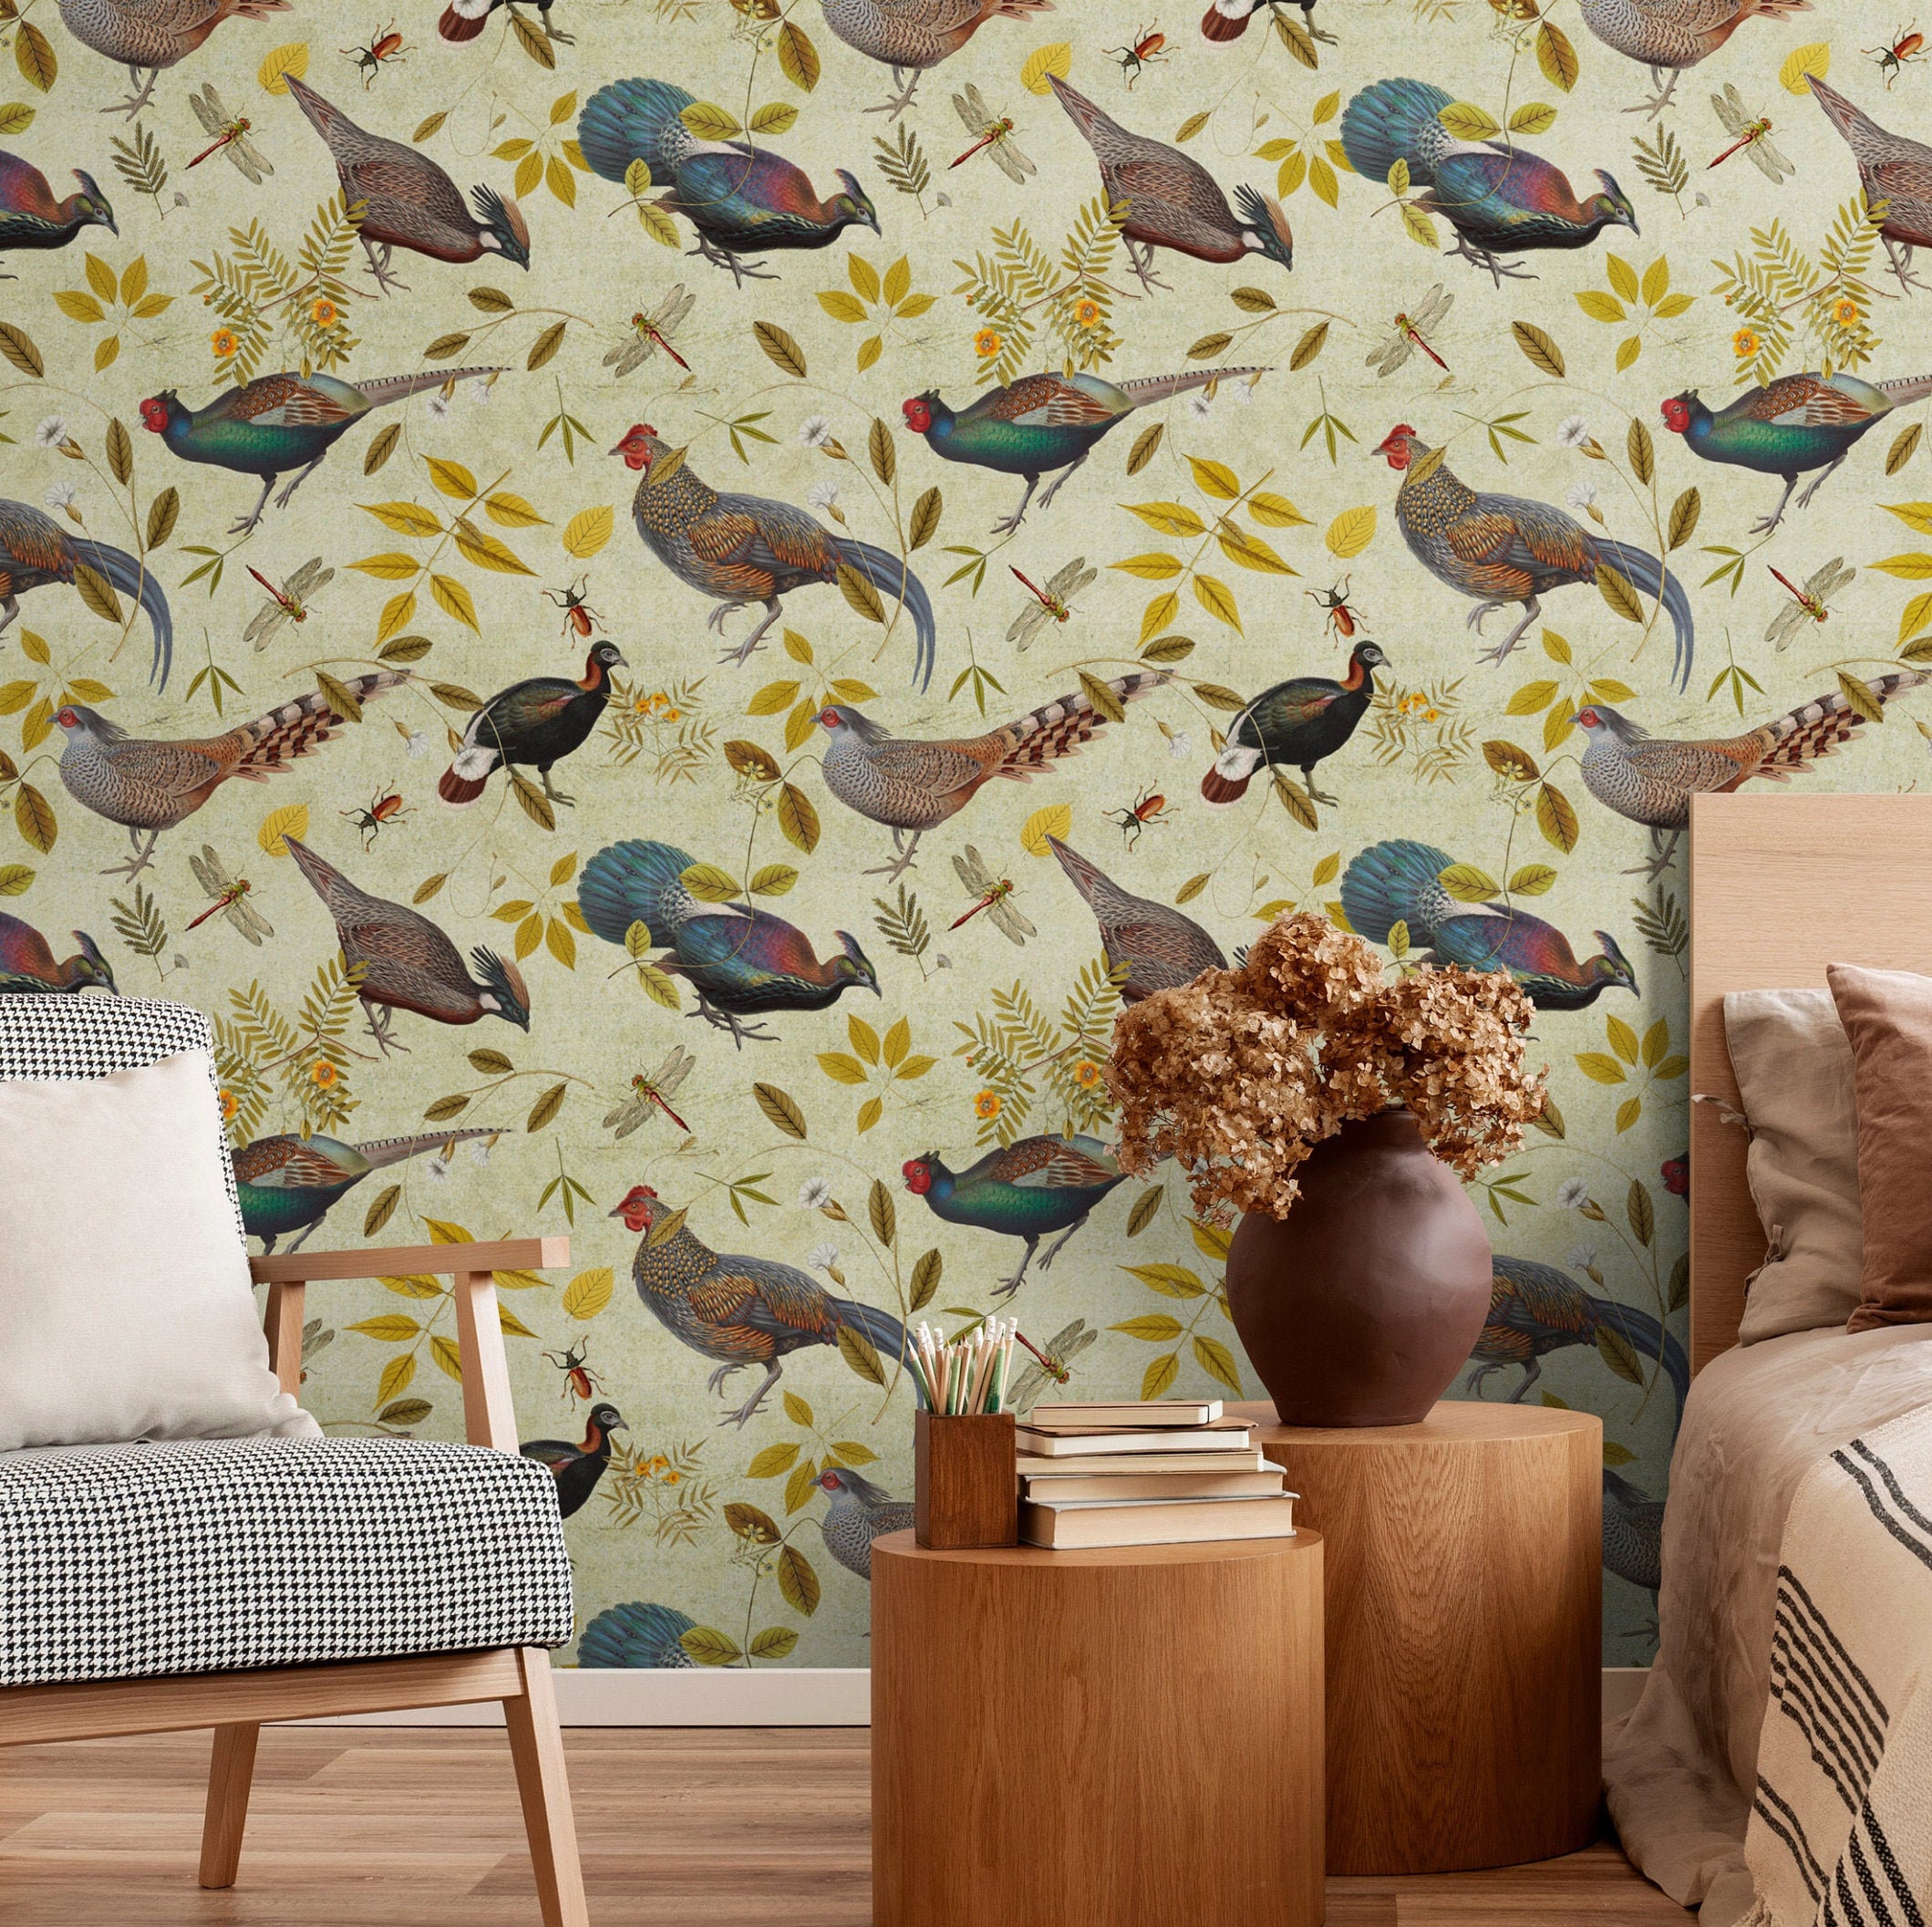 Hunting Wallpaper Peel and Stick, Vintage Style Wall Paper With Pheasant  Birds, Wall Decal Cabin Décor 